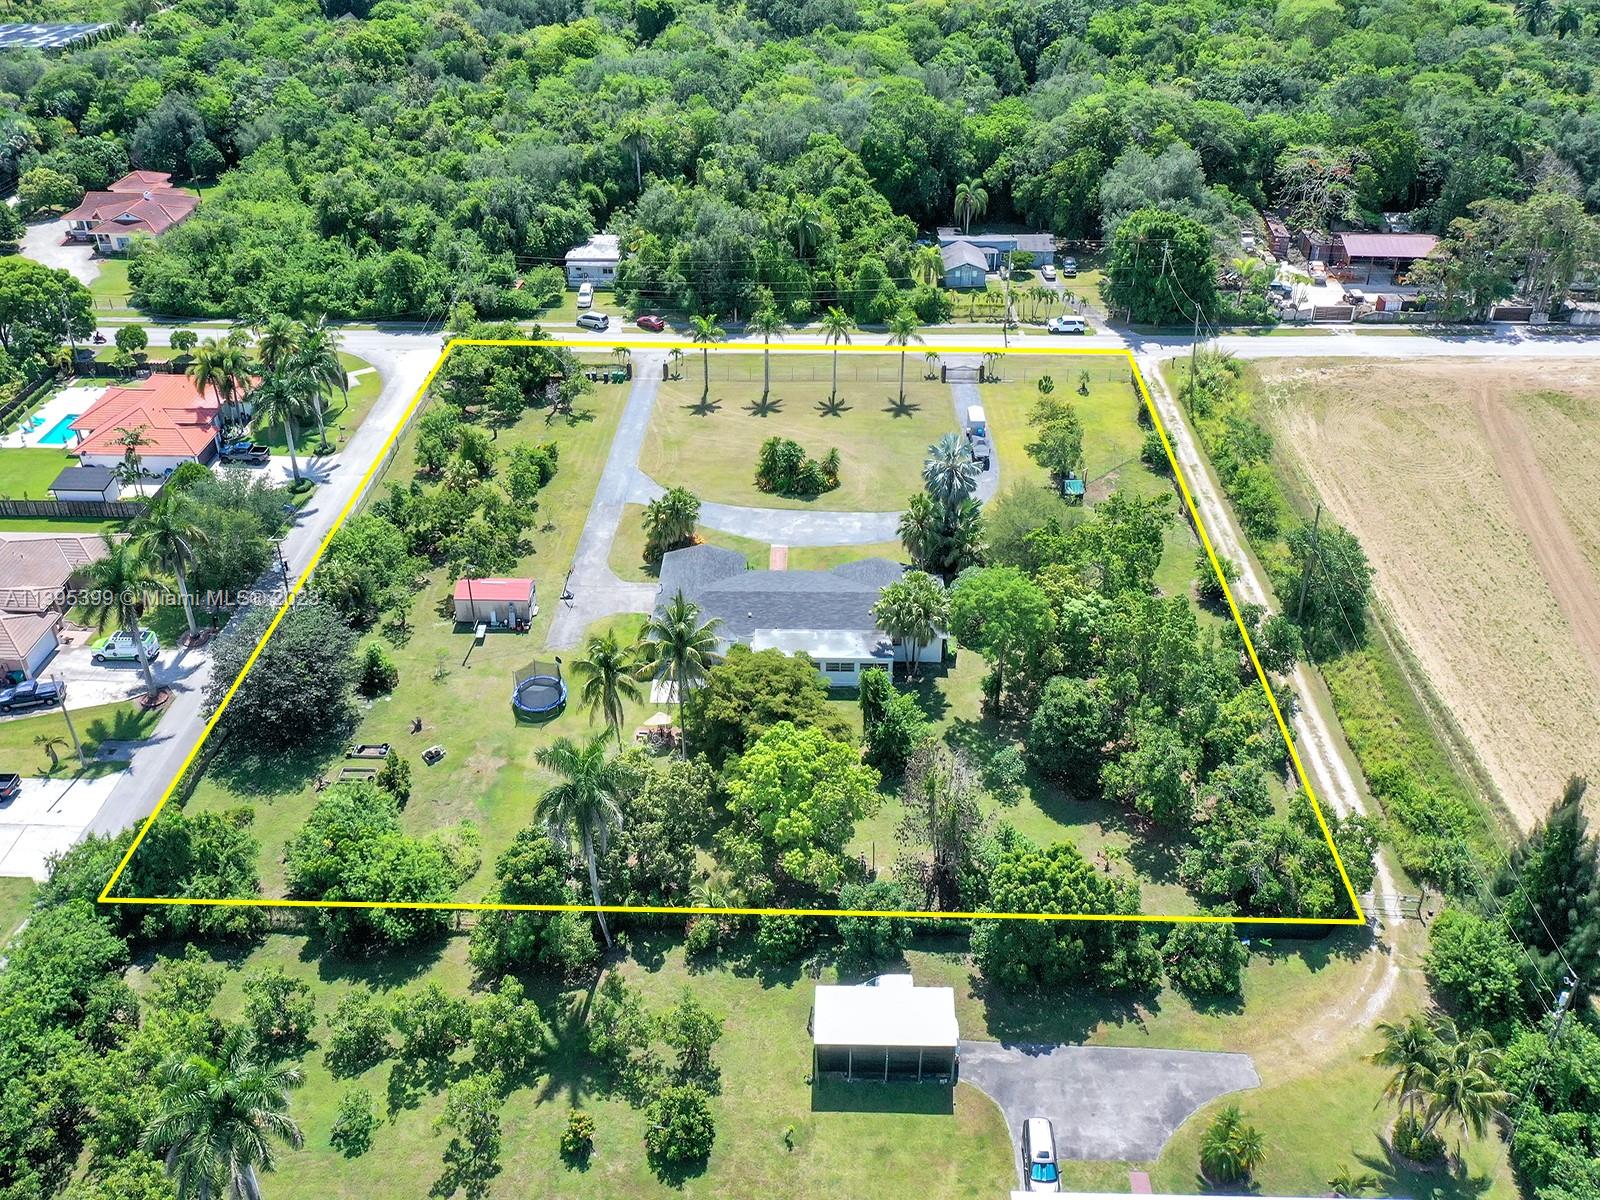 A  2.31- acre property that provides a few excellent options: can be subdivided into 3-5 builders lots; suitable for ALF (Adult living facility) a daycare, nursery, a very large family, or any other business that requires a lot of space.
Very convenient and beautiful area close to Florida turnpike just off 288th St/ Biscayne & Krome avenue.
This understated 5/4 residence includes formal living & dining areas  , very large office space, a huge indoor patio 
  ,large kitchen, master & junior master suites, mother-in-law quarters, and lots of closet space throughout the home .
New roof (2020) granite countertops, two large sheds, new well pump, as well as mature avocado ,mango, lychee, longyan coconut and other trees.